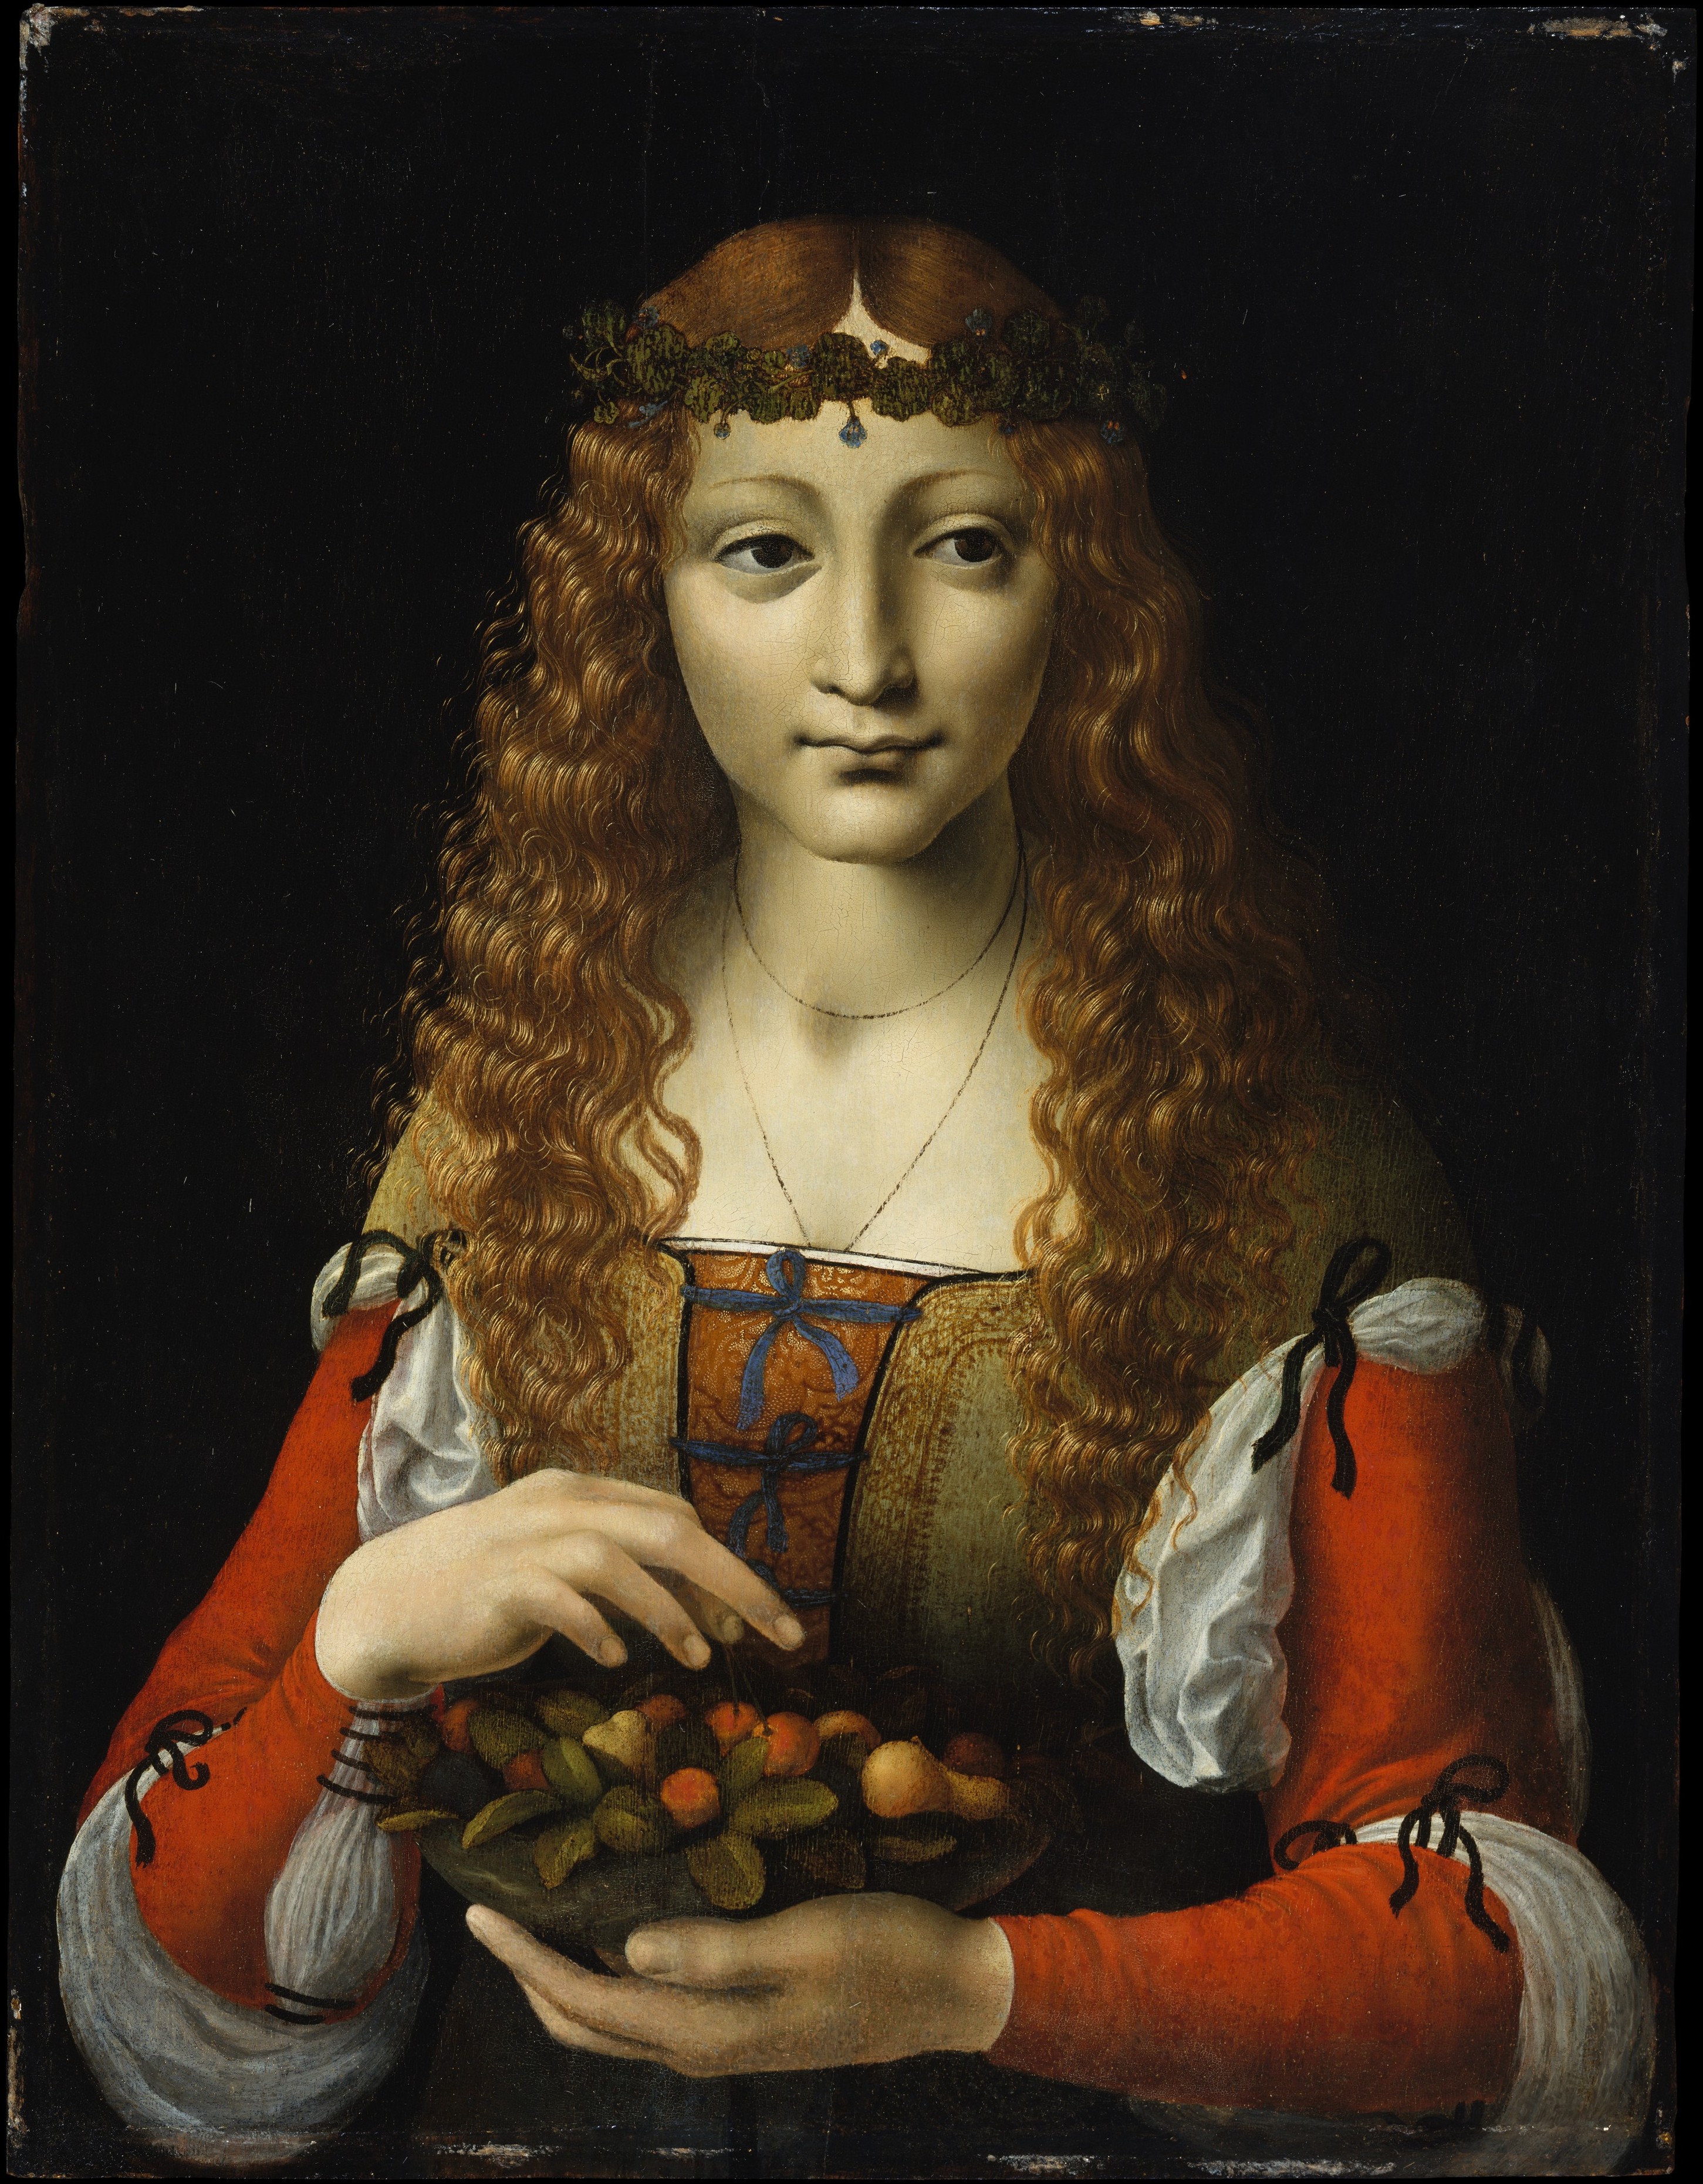 Girl with Cherries by Marco d'Oggiono (Attributed) - ca. 1491–95 - 48.9 x 37.5 cm Metropolitan Museum of Art